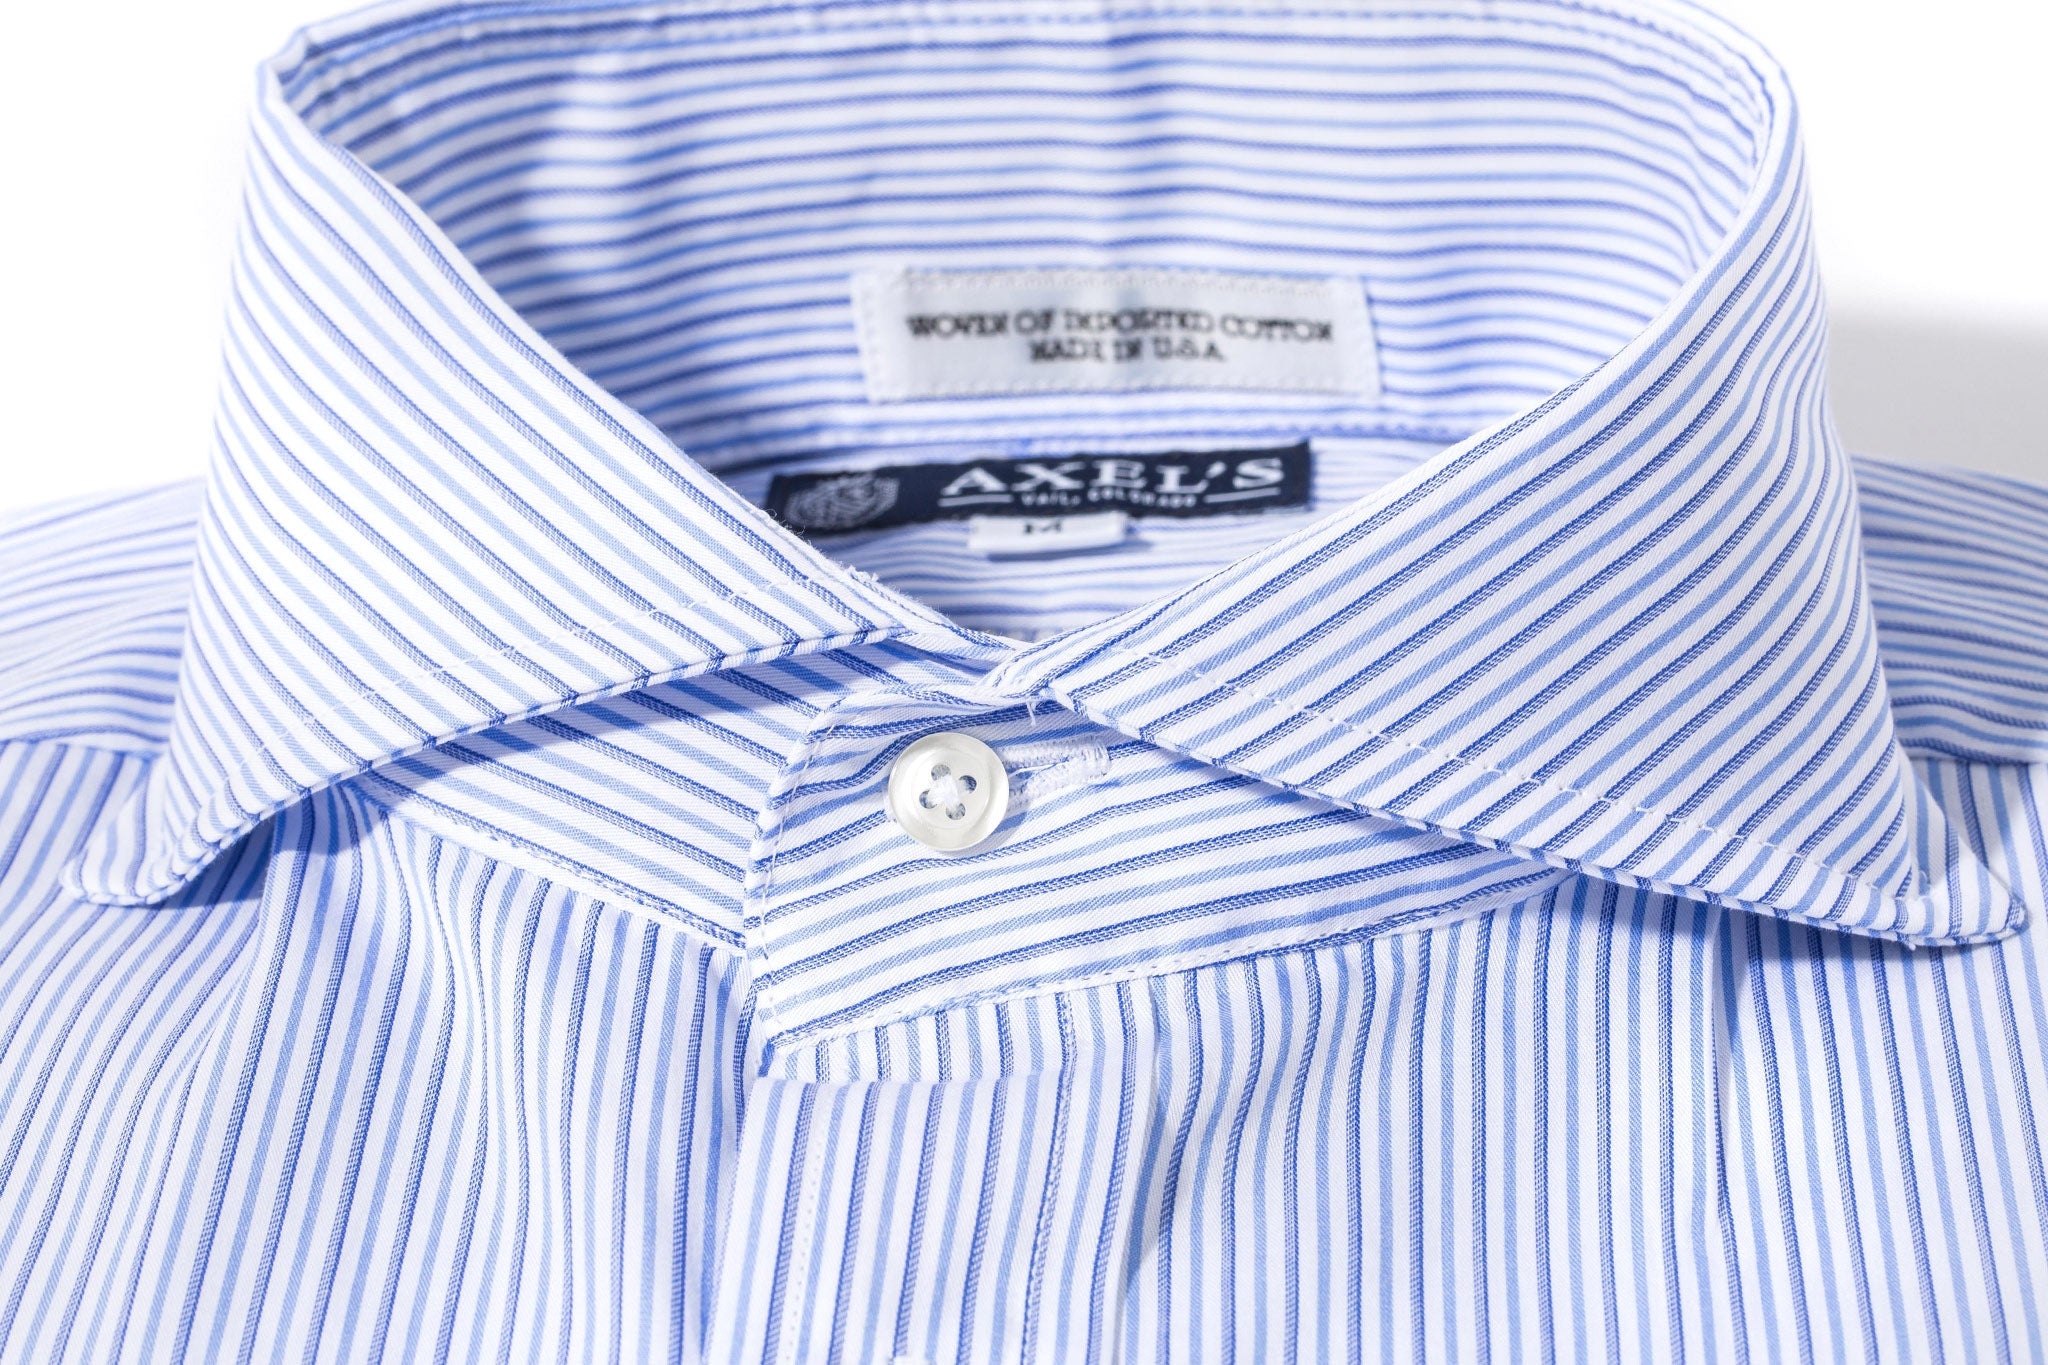 Exeter Double Stripe Shirt In Blue | Mens - Shirts - Outpost | Axels-Is